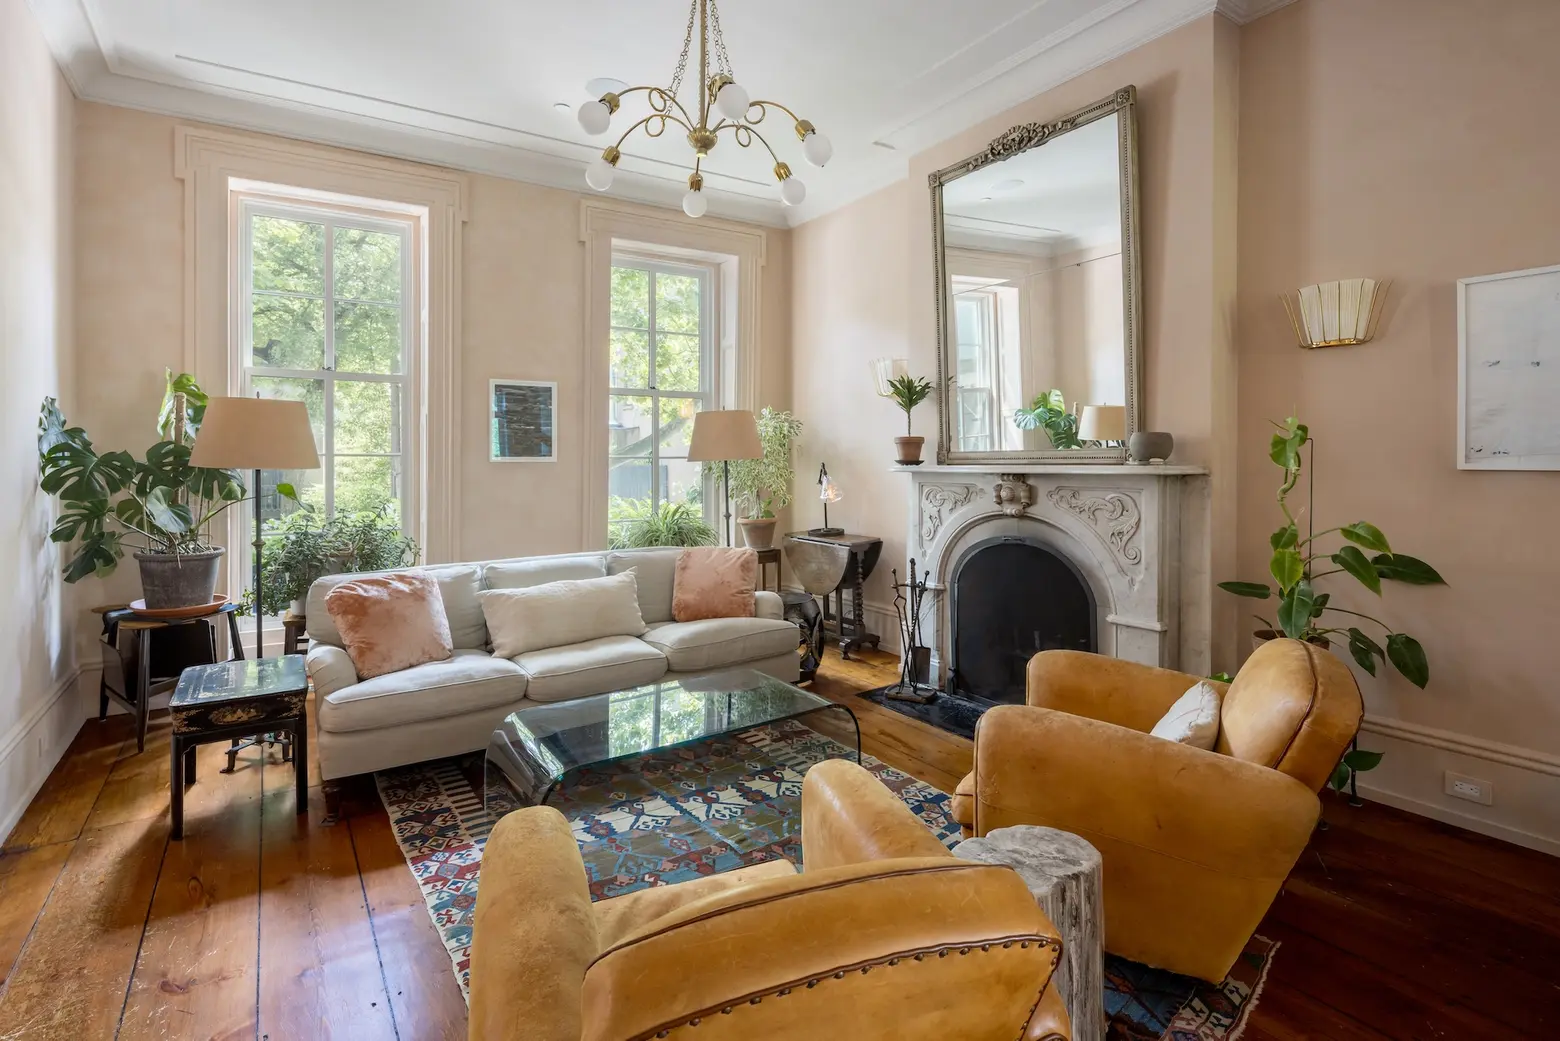 For $11M, this Cobble Hill townhouse offers modern comforts, elevated design, and a garage